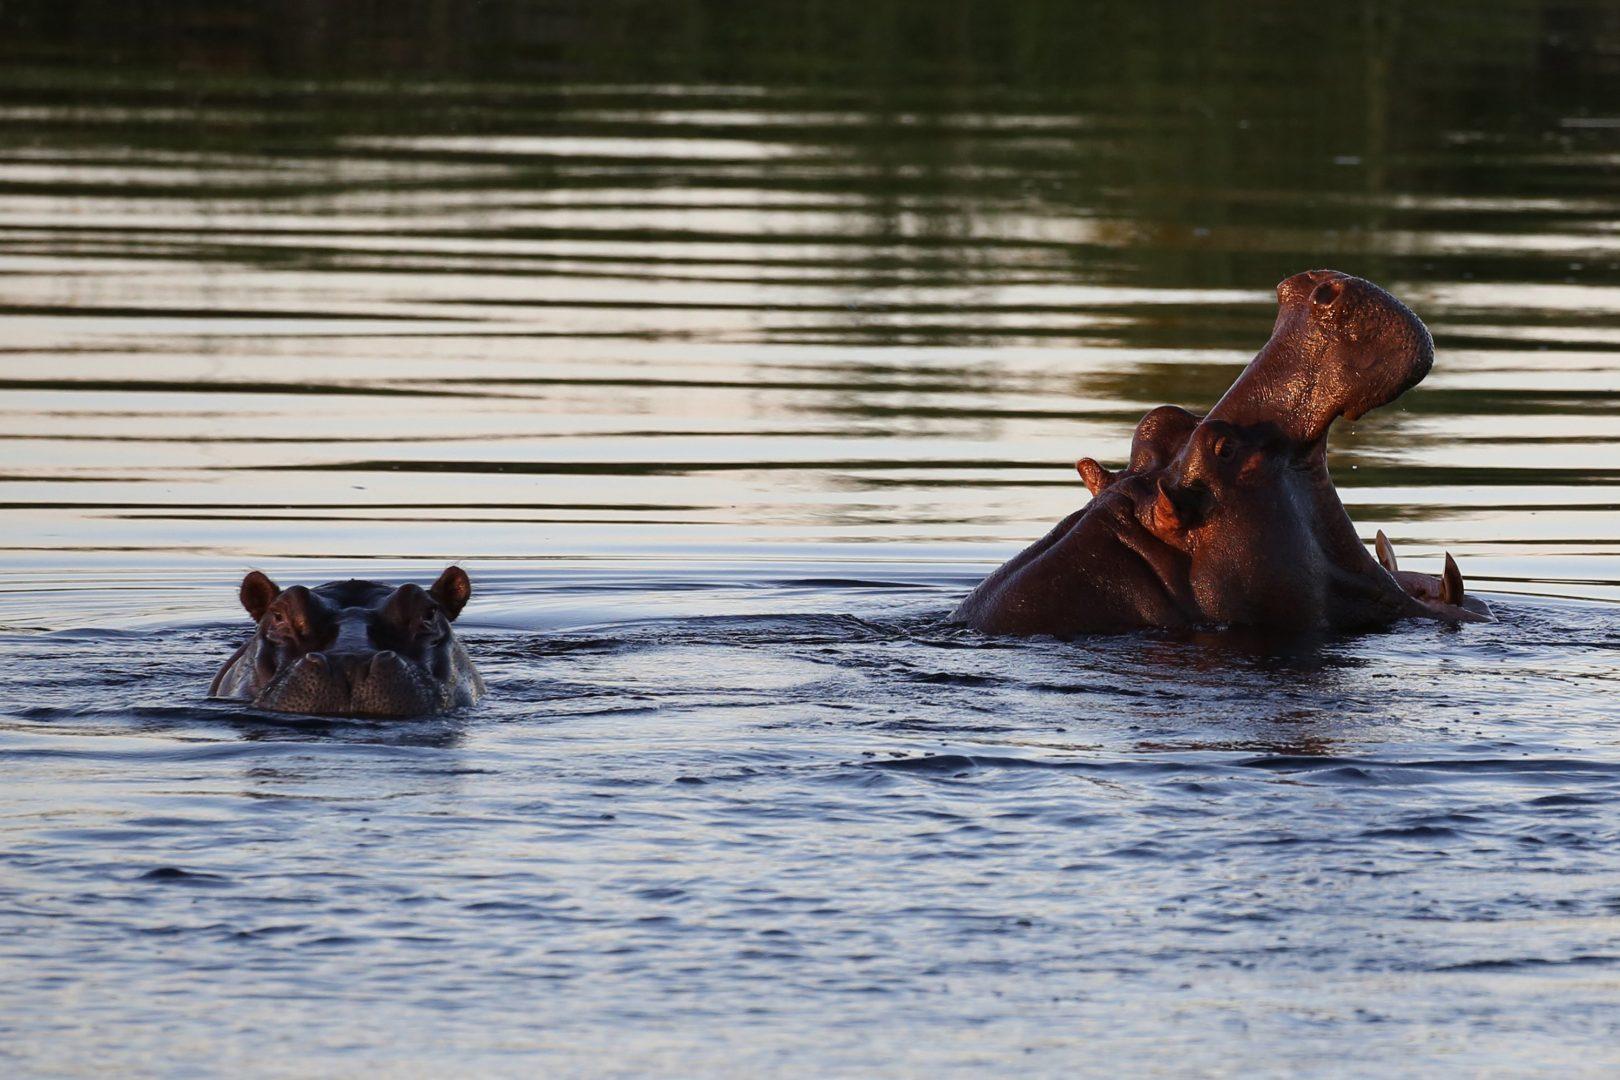 Hippos pop up their heads during a cruise along the Kwando River in Namibia. Twenty-two hippopotamuses have died from anthrax disease at Liwonde National Park in Malawi over the past two months, a wildlife official said on Tuesday. (Michaela Urban/Chicago Tribune/TNS)